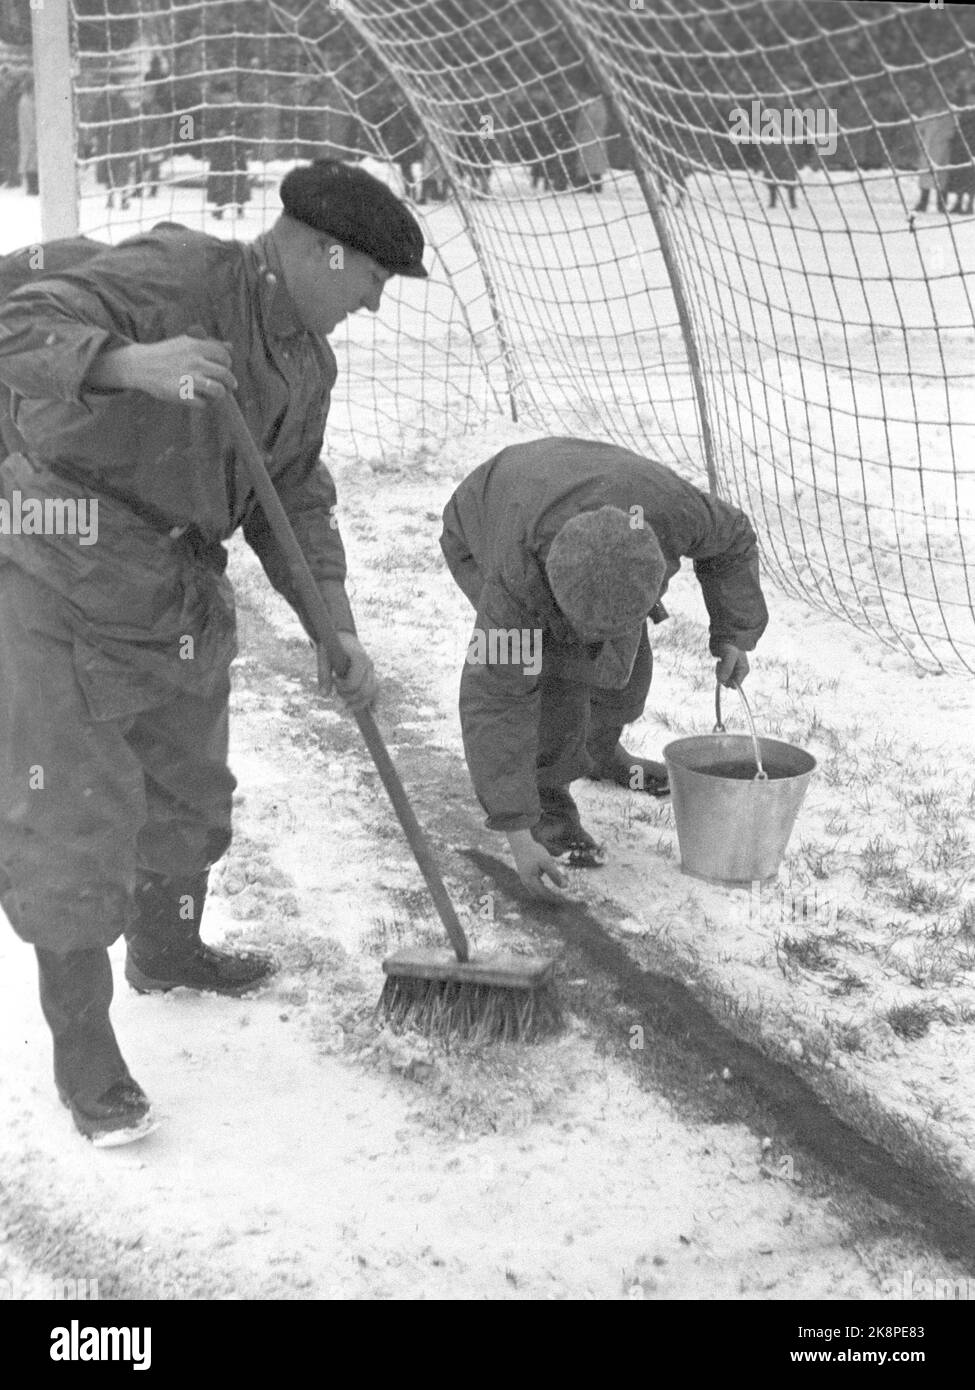 Oslo 19471115. Football in snowy weather at Bislett. The football match between Dynamo and Skeid was played on winter. Before and during the match it snowed tightly, and the grass mat was white and hard. 32,000 spectators are a record at Bislett. In the fresh snow, white sidelines are not useful. Both before and during the break between the laps, the track people sprinkle red tennis court flour on the lines to mark them. Photo: Current / NTB Stock Photo